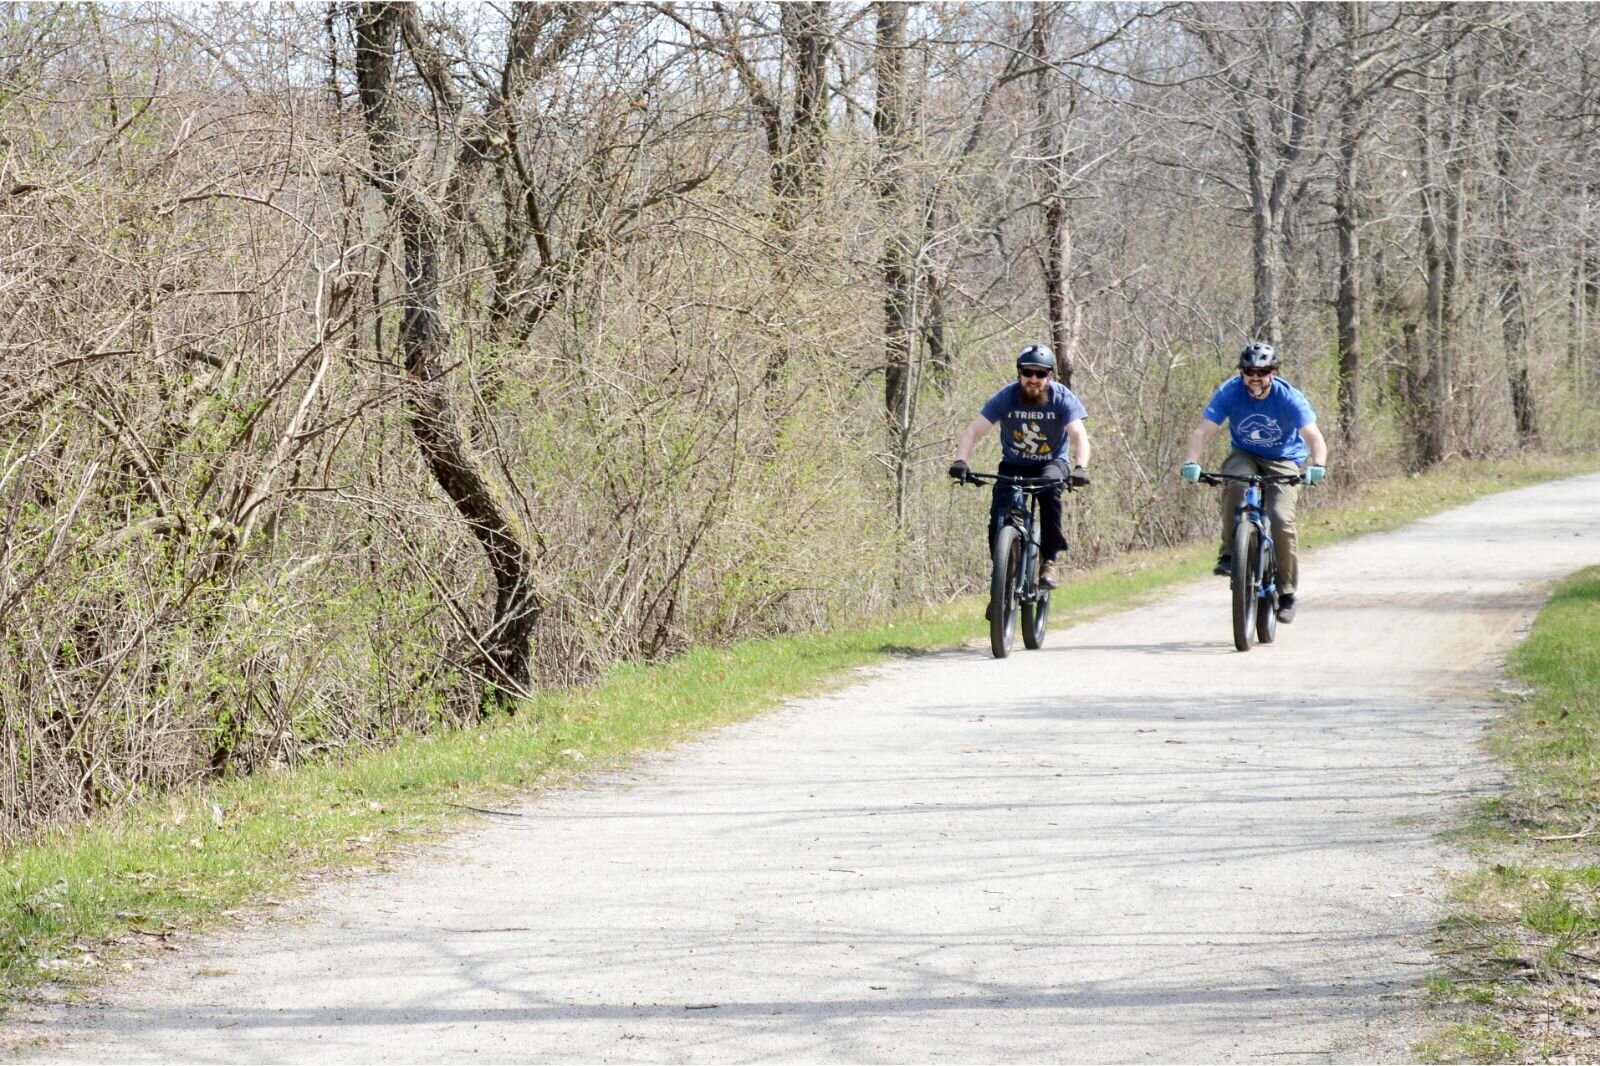 All levels of bike riders out on a nice Saturday, April 23.